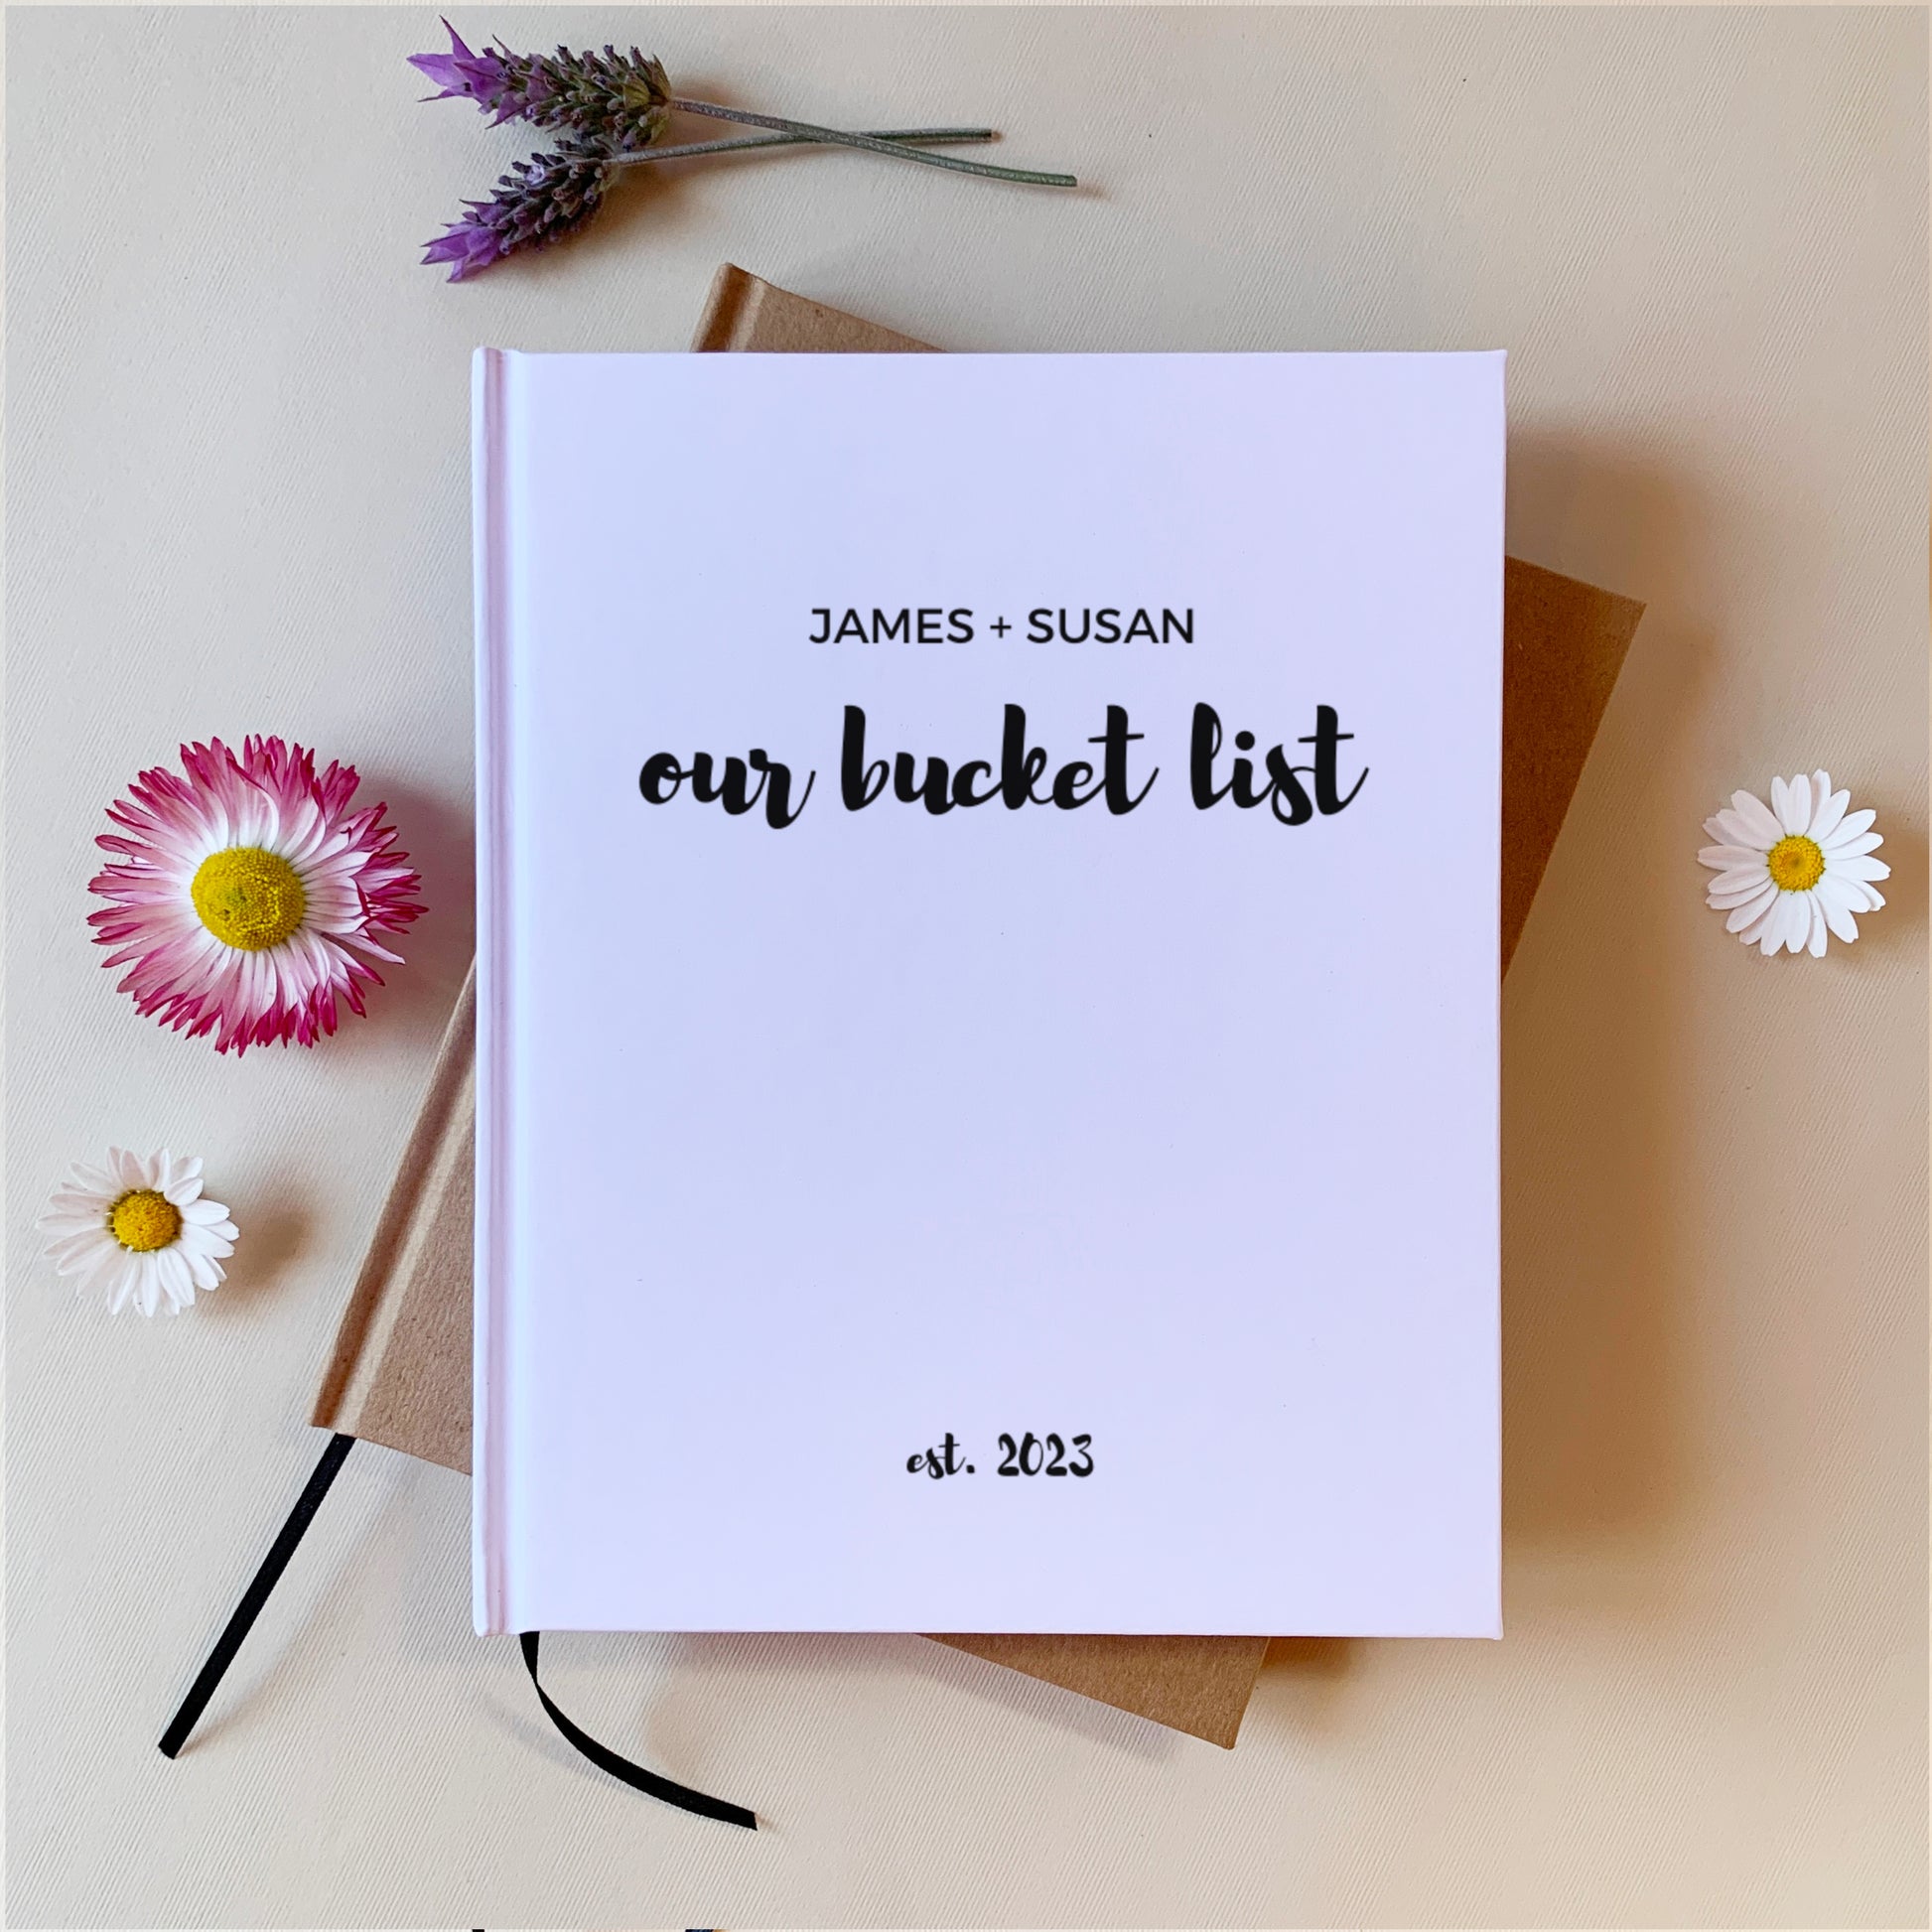 Personalized Travel Book Wanderlust Gift 5th Anniversary Gift